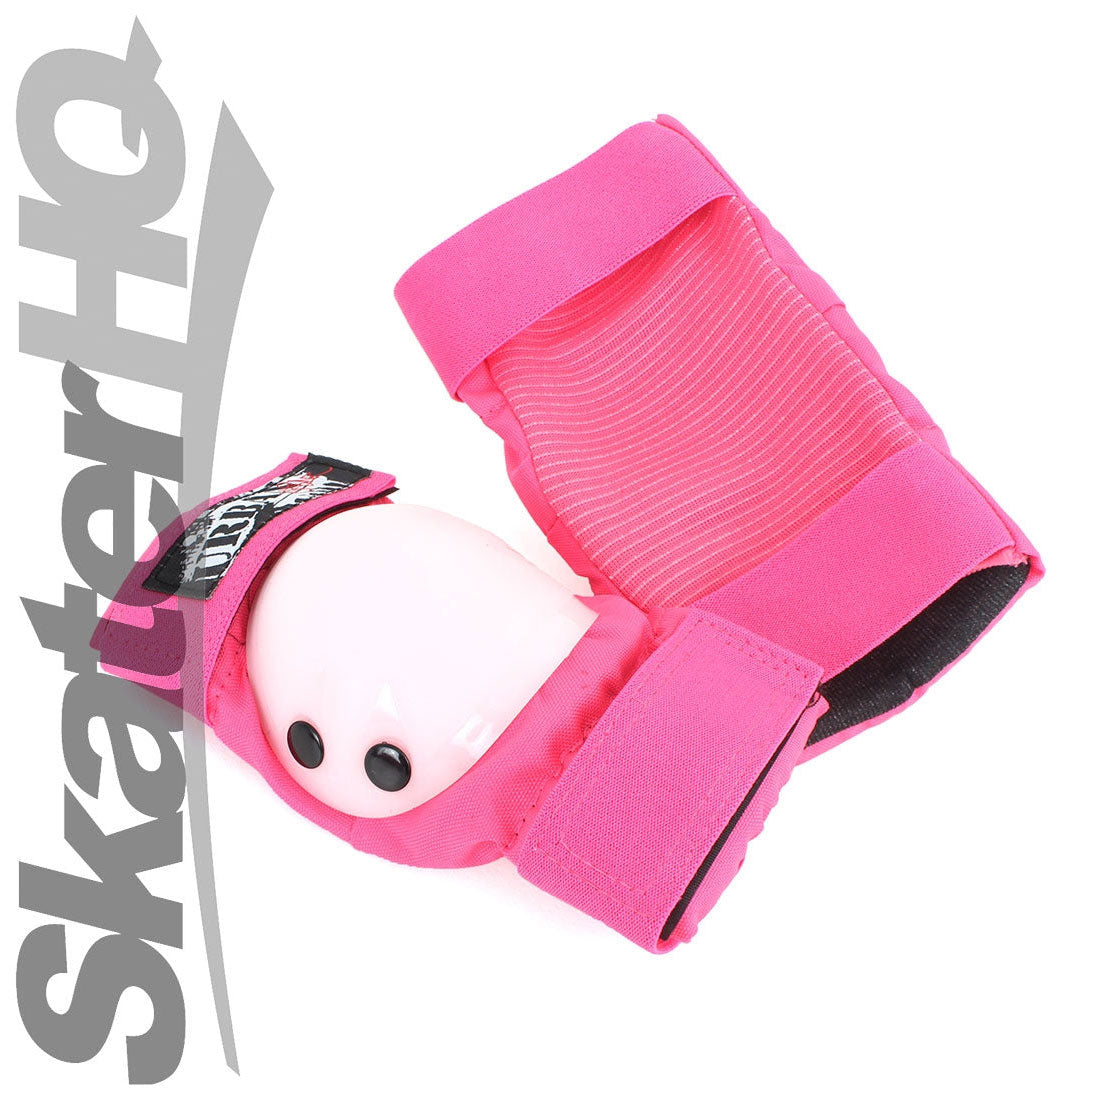 Urban Skater Knee/Elbow Pink - Large Protective Gear